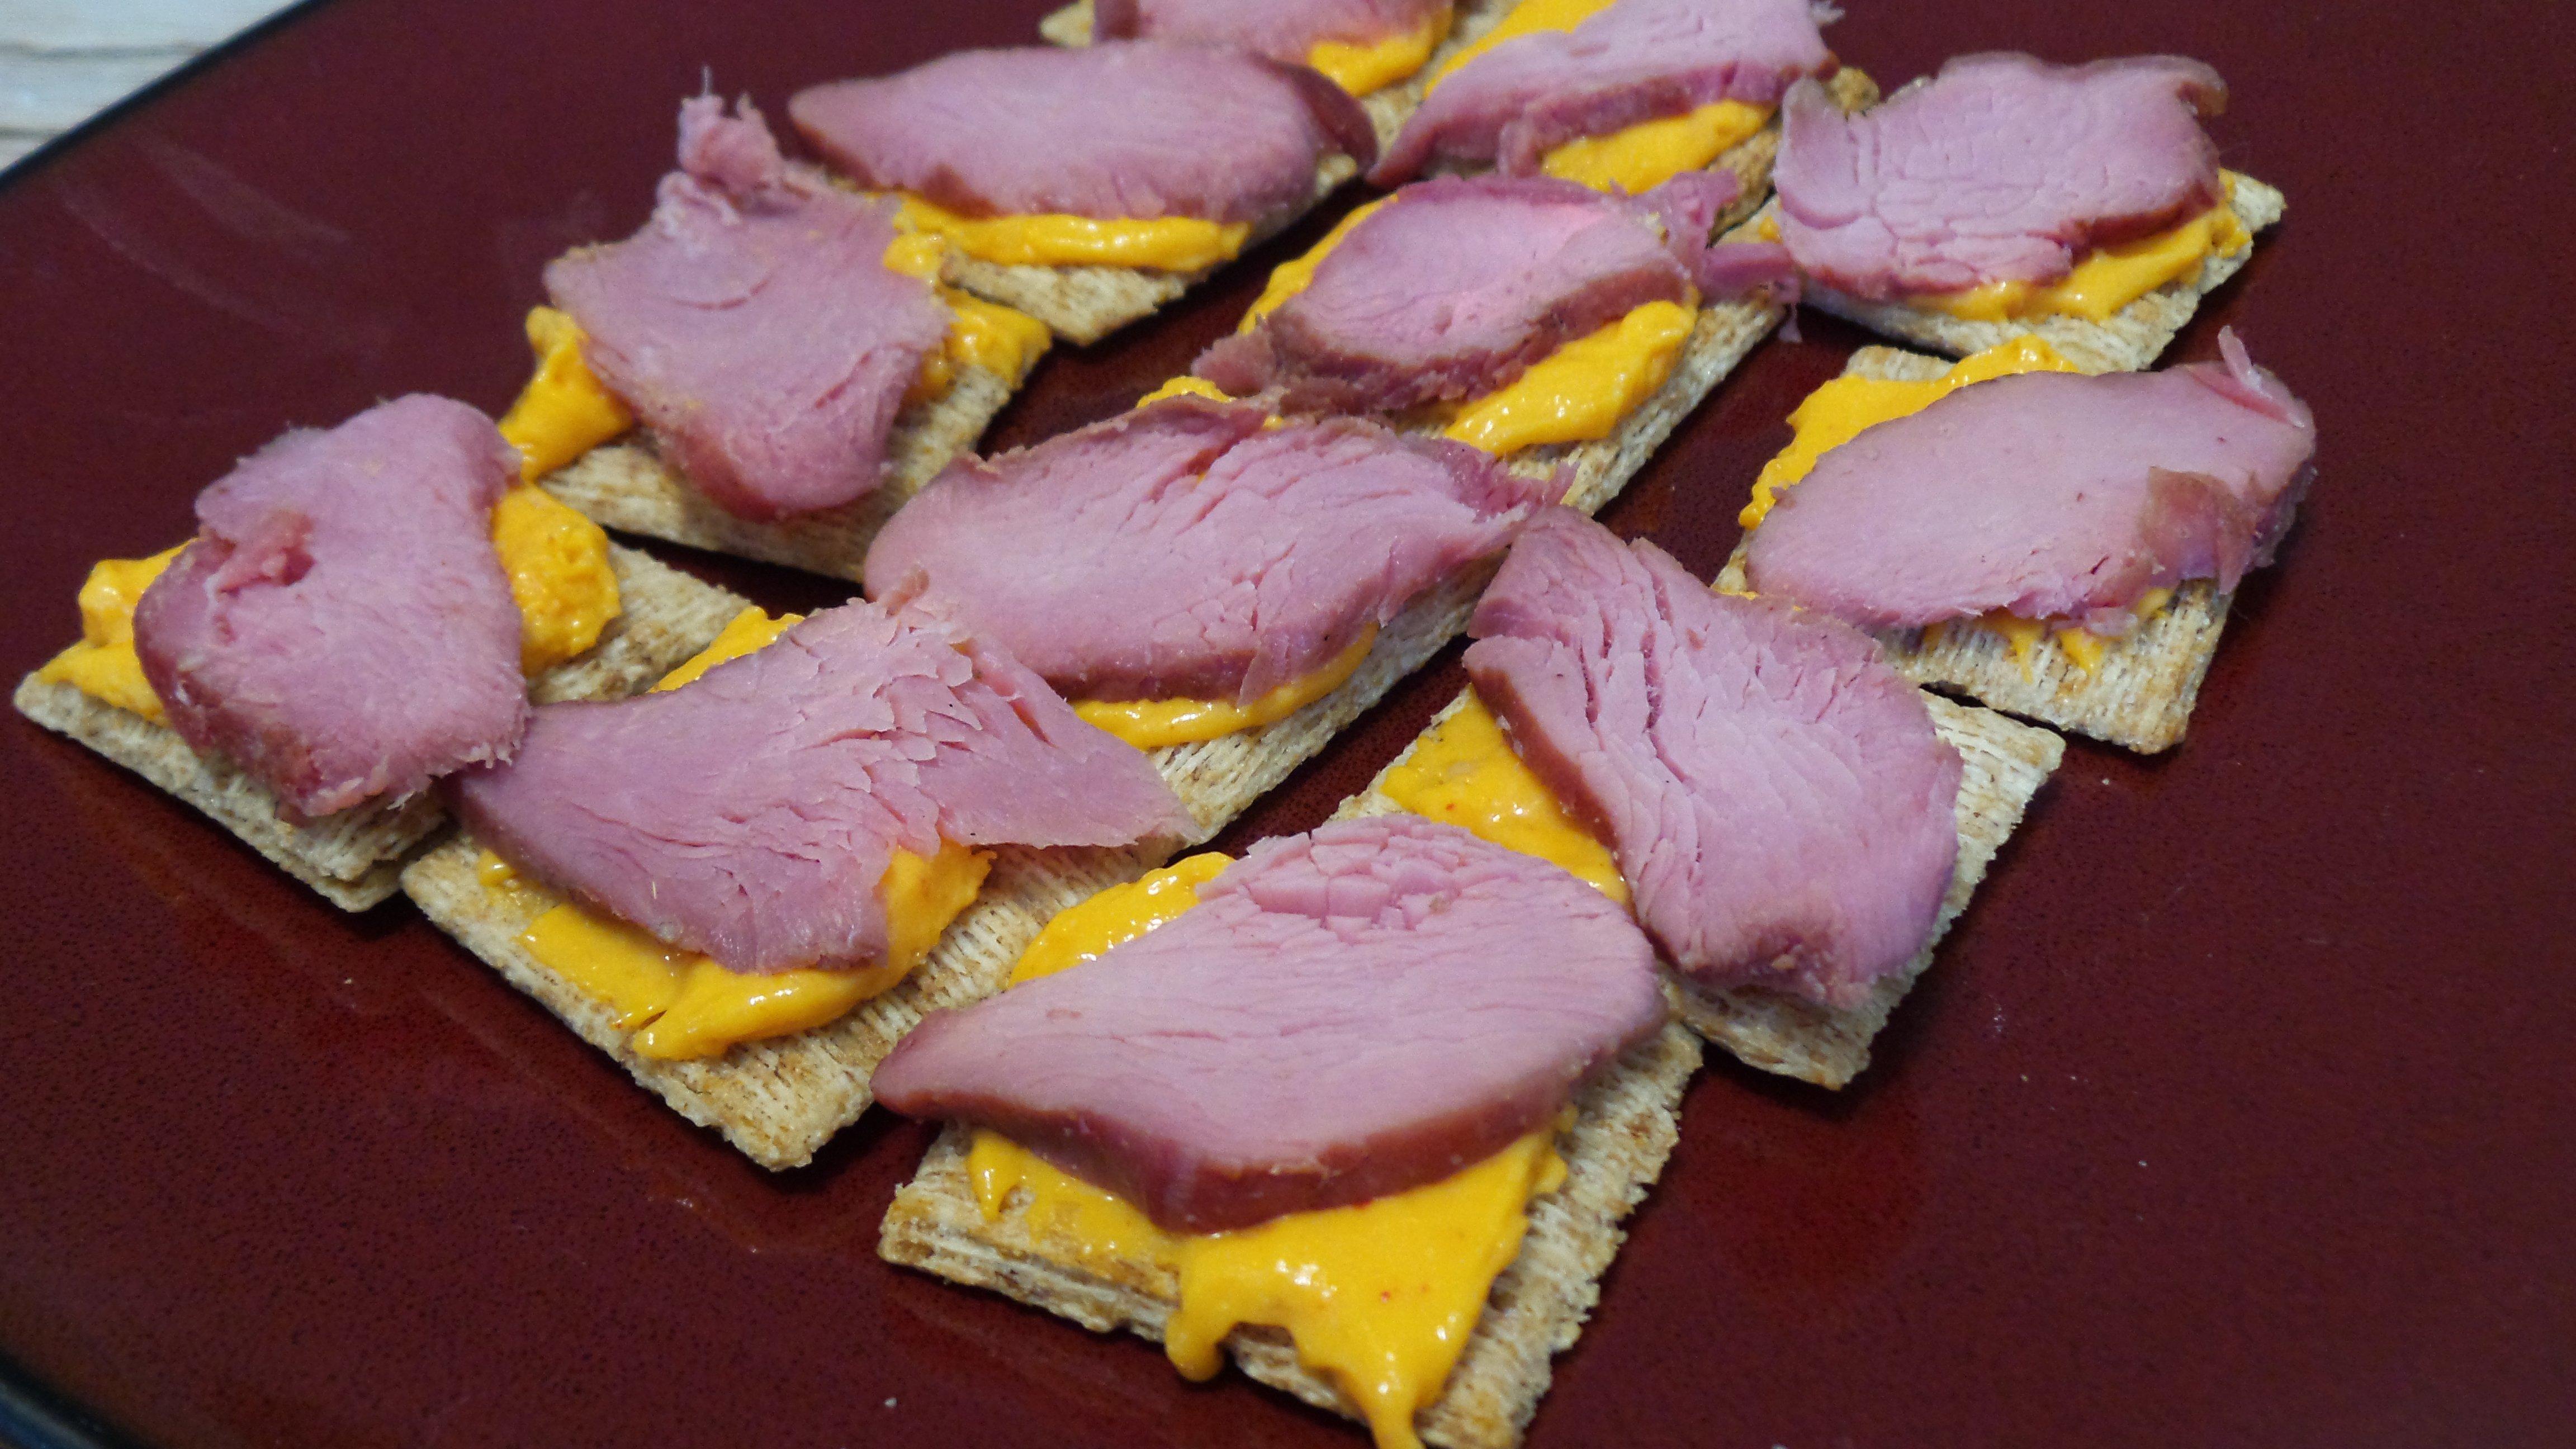 Try the Canadian bacon on crackers with your favorite spicy beer cheese.